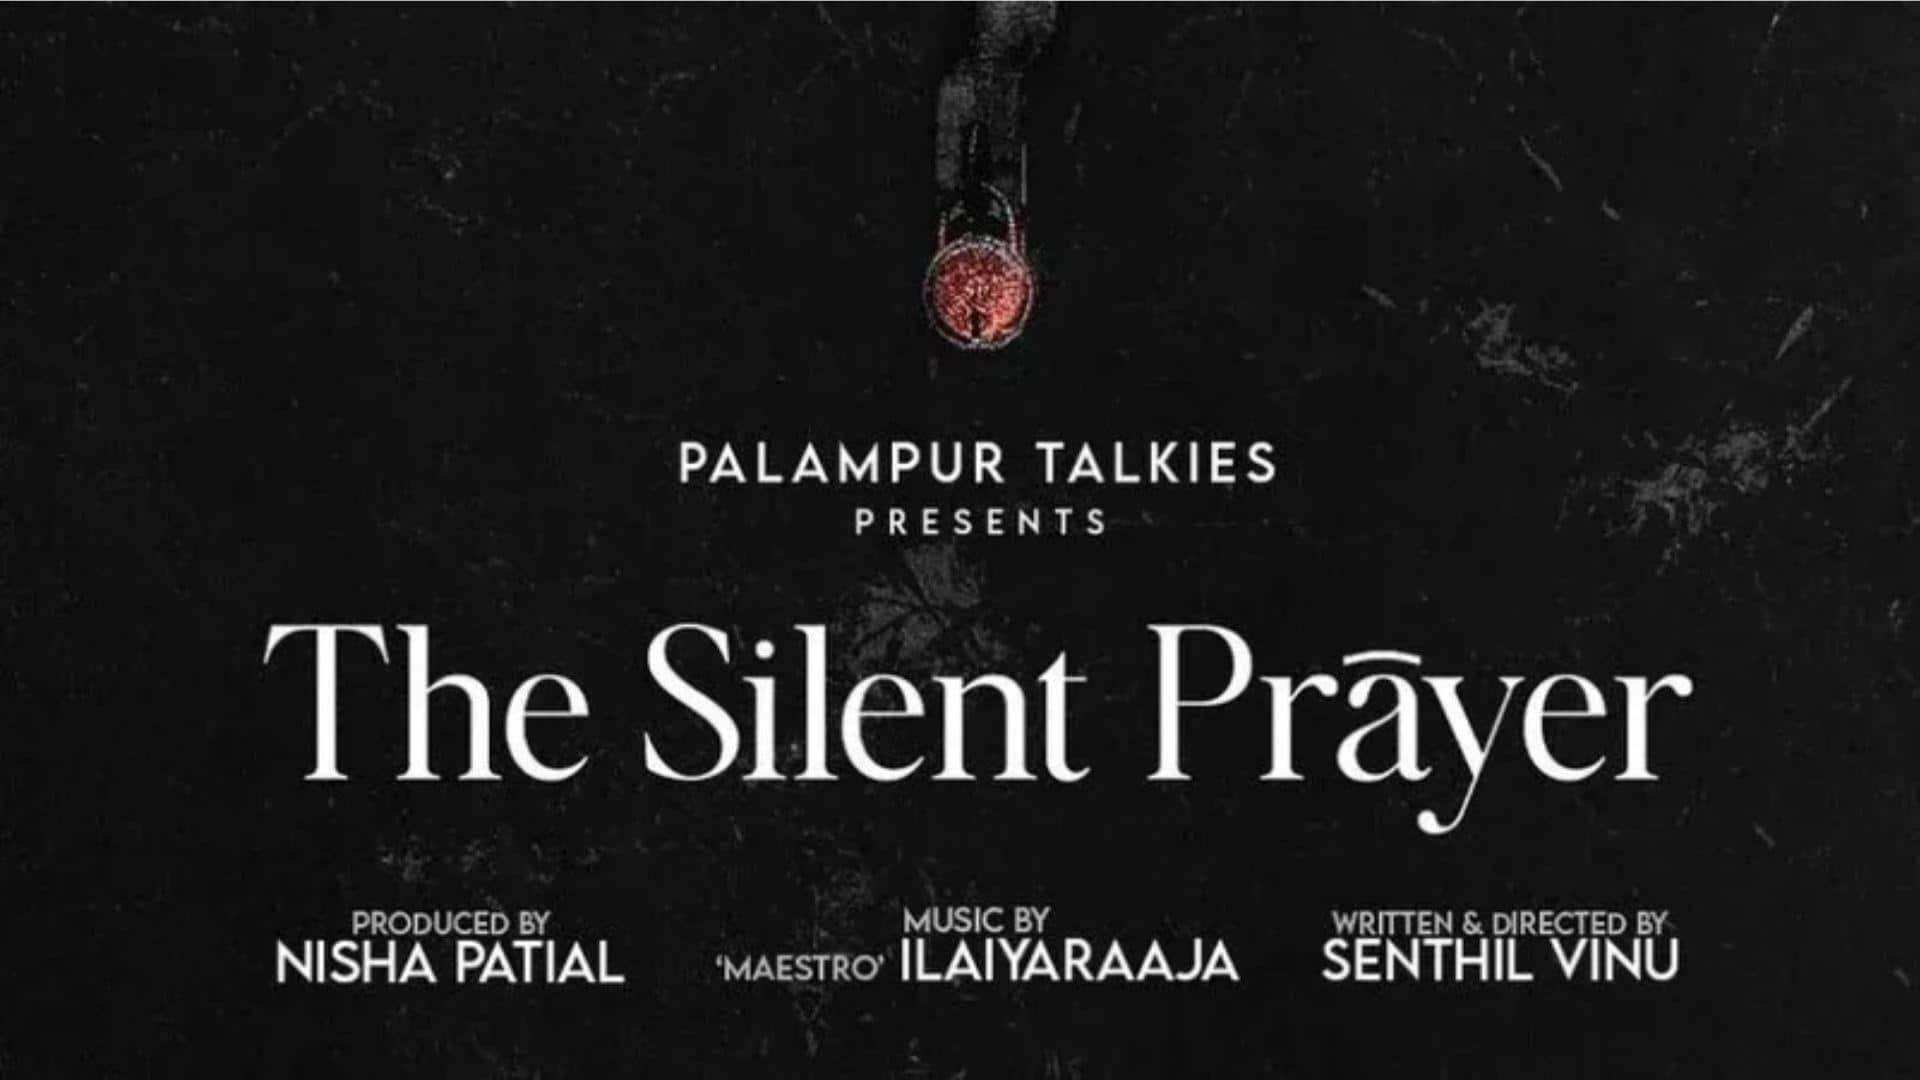 'The Silent Prayer' will premiere at the Red Lorry Festival